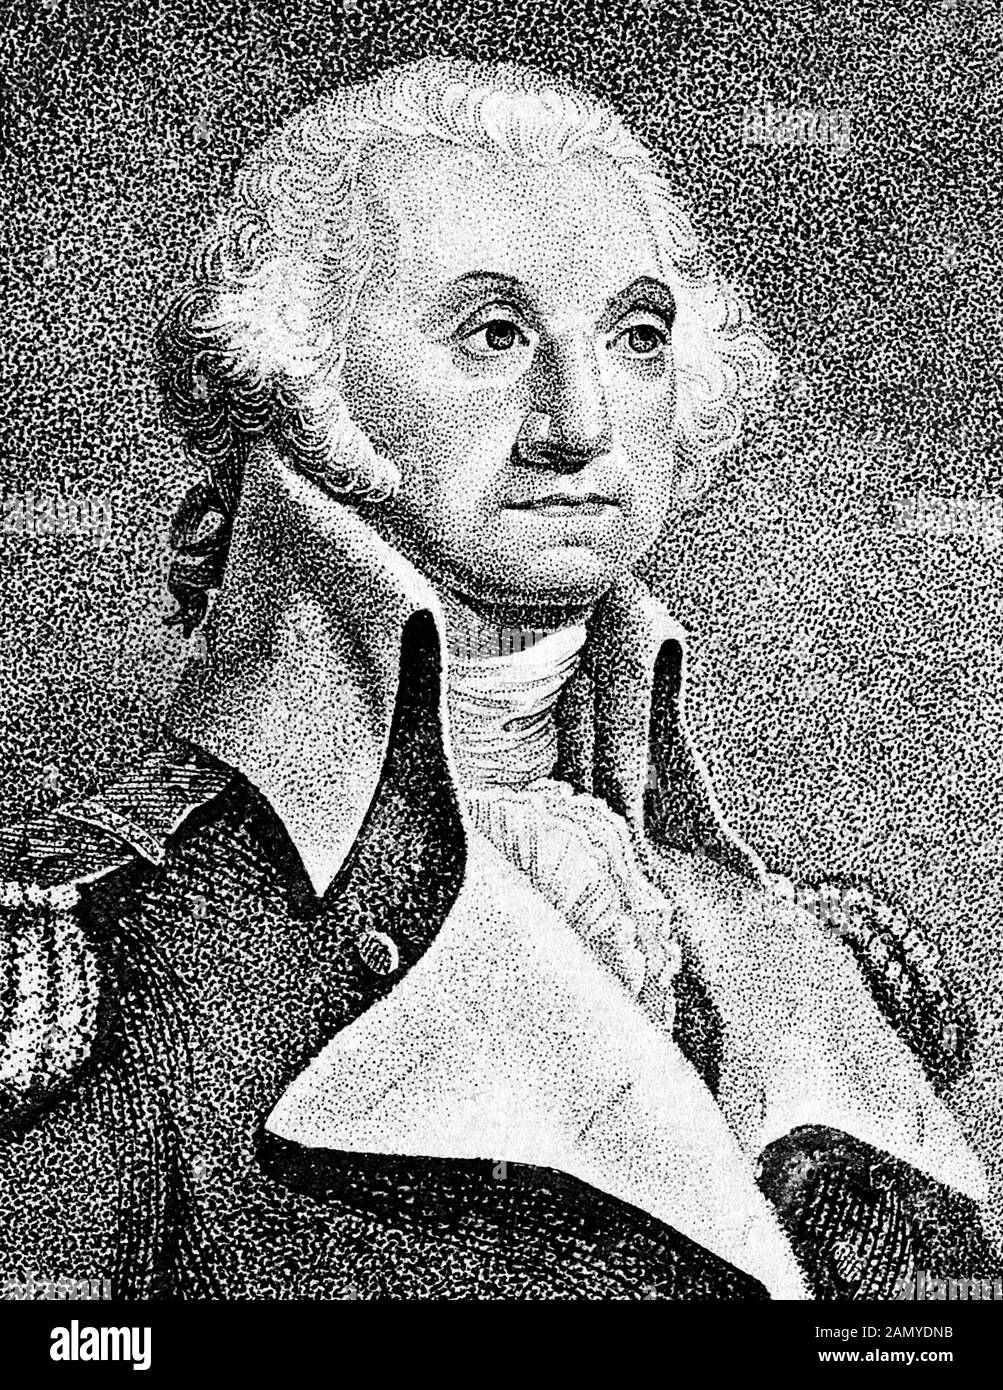 Vintage portrait of General George Washington (1732 - 1799) – Commander of the Continental Army in the American Revolutionary War / War of Independence (1775 – 1783) and the first US President (1789 - 1797). Detail from a print circa 1812 from an engraving by Thomas Gimbrede. Stock Photo